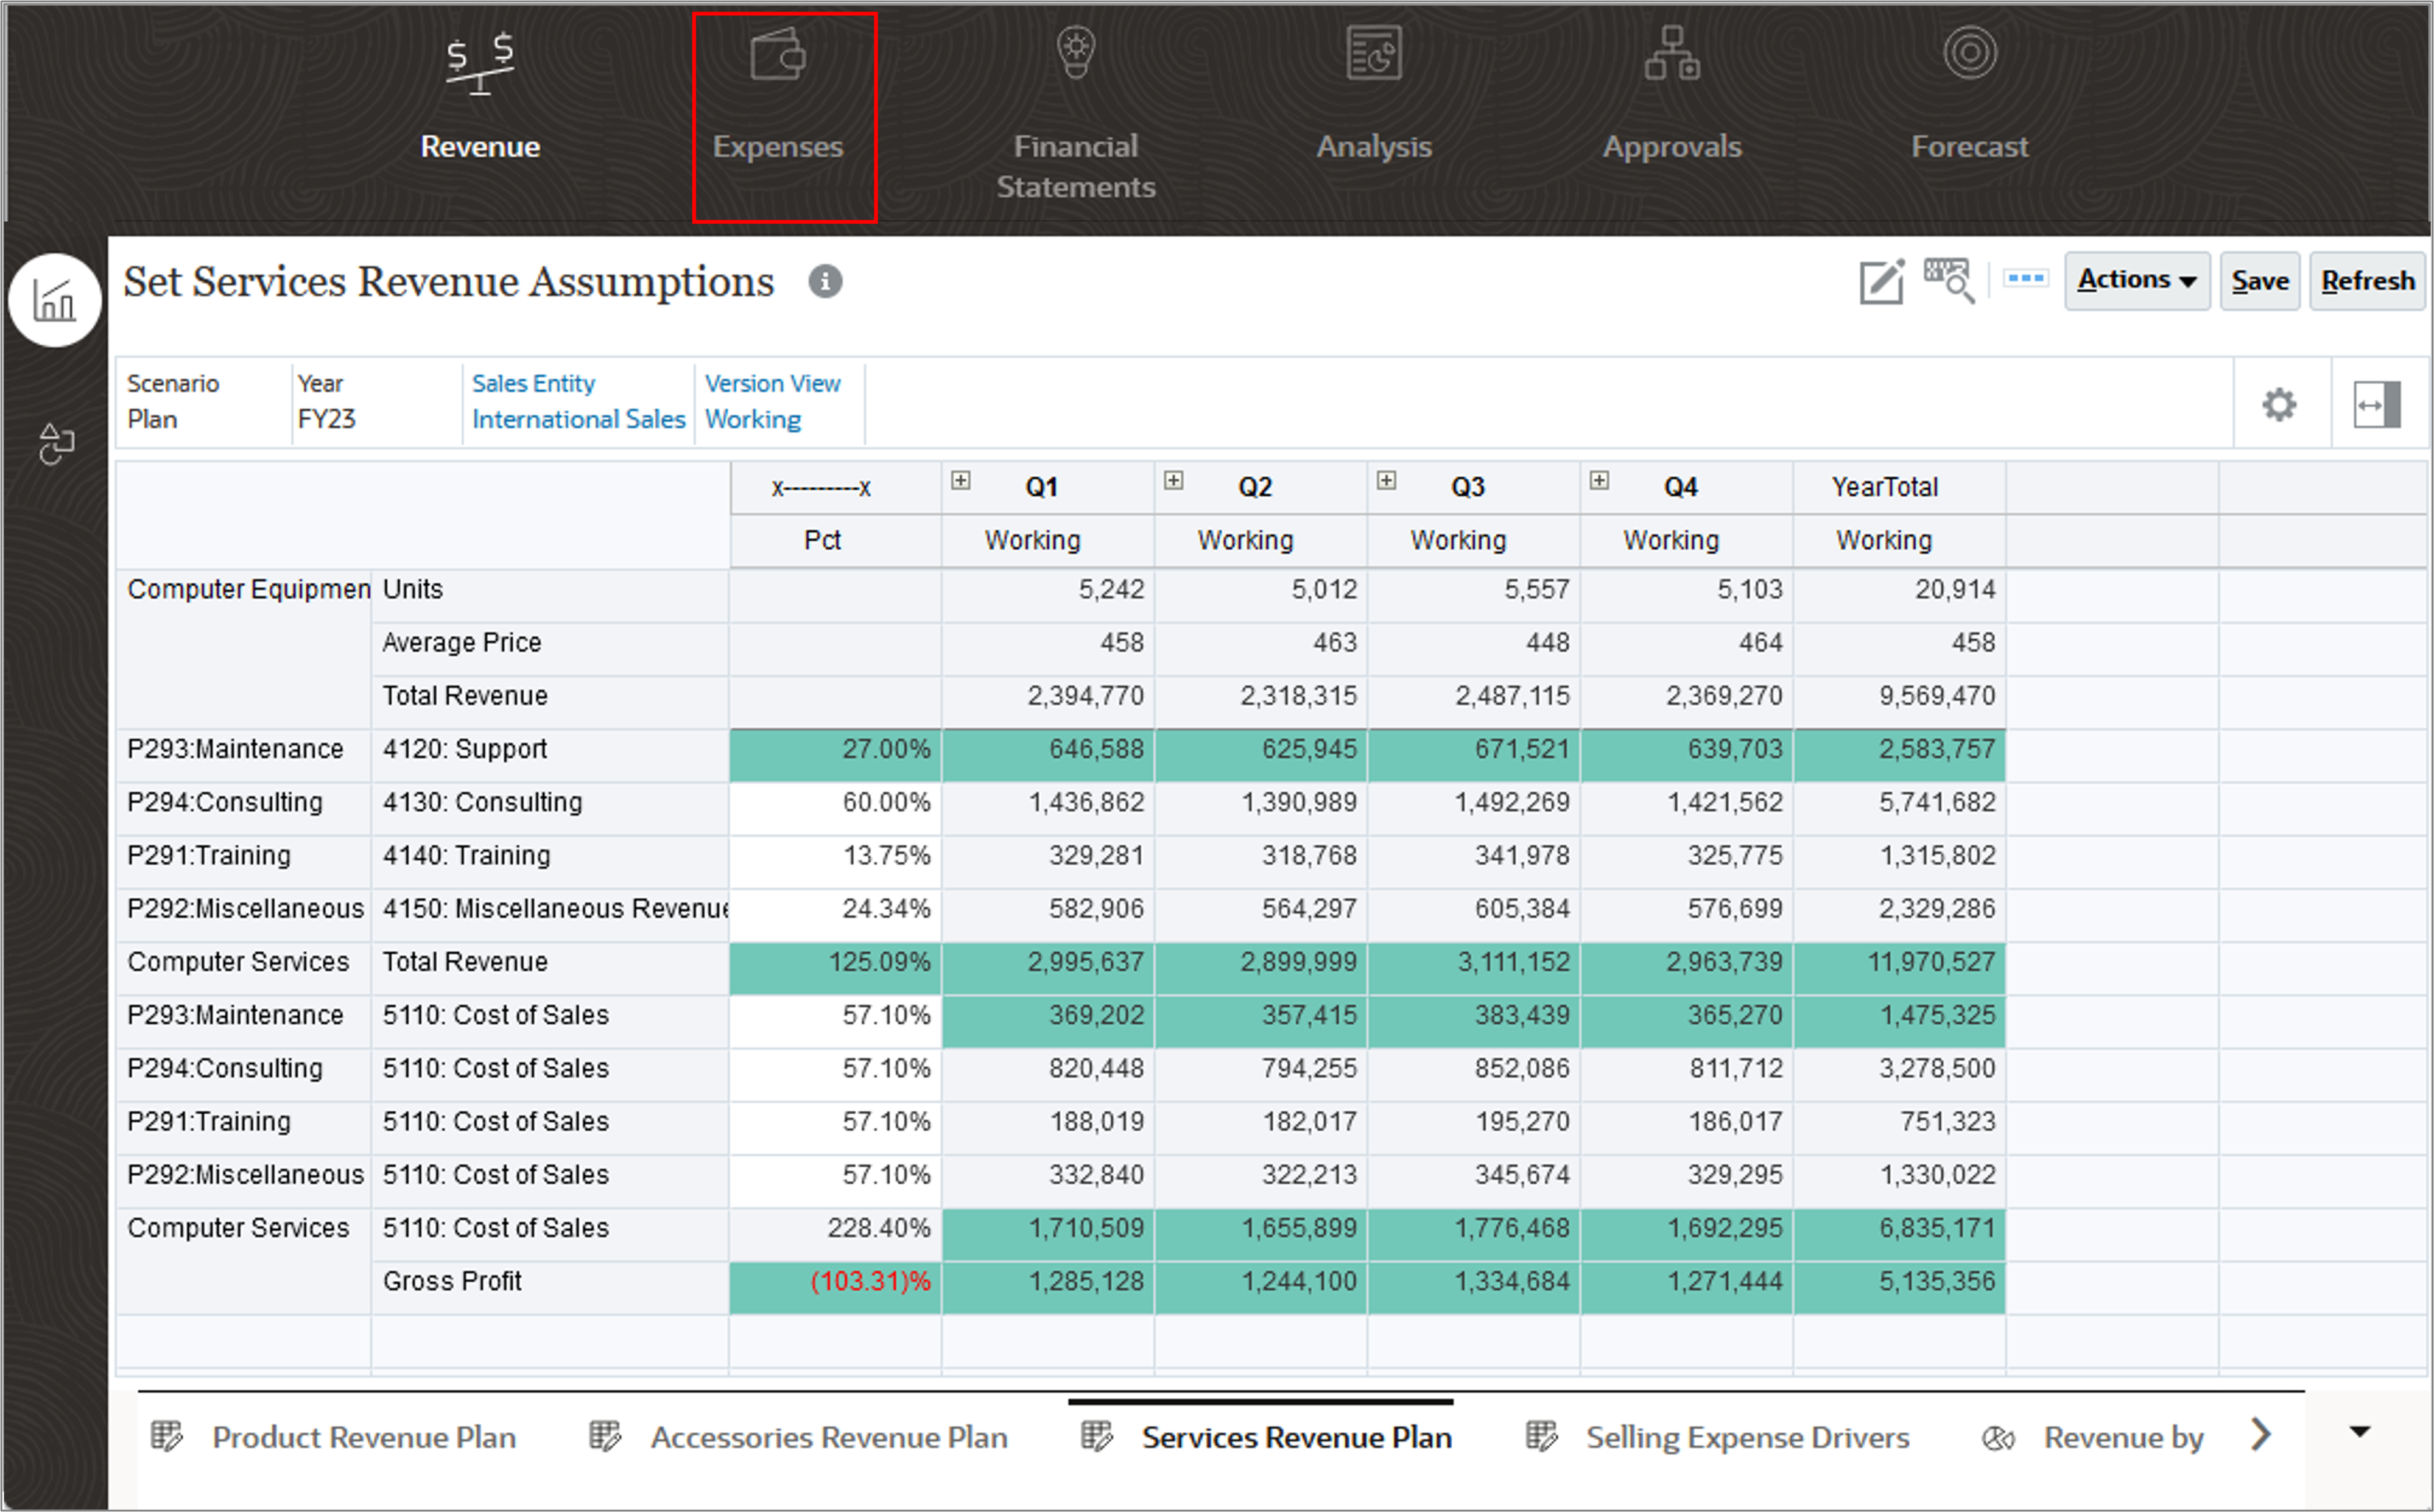 Set Services Revenue Assumptions with Expenses card Highlighted